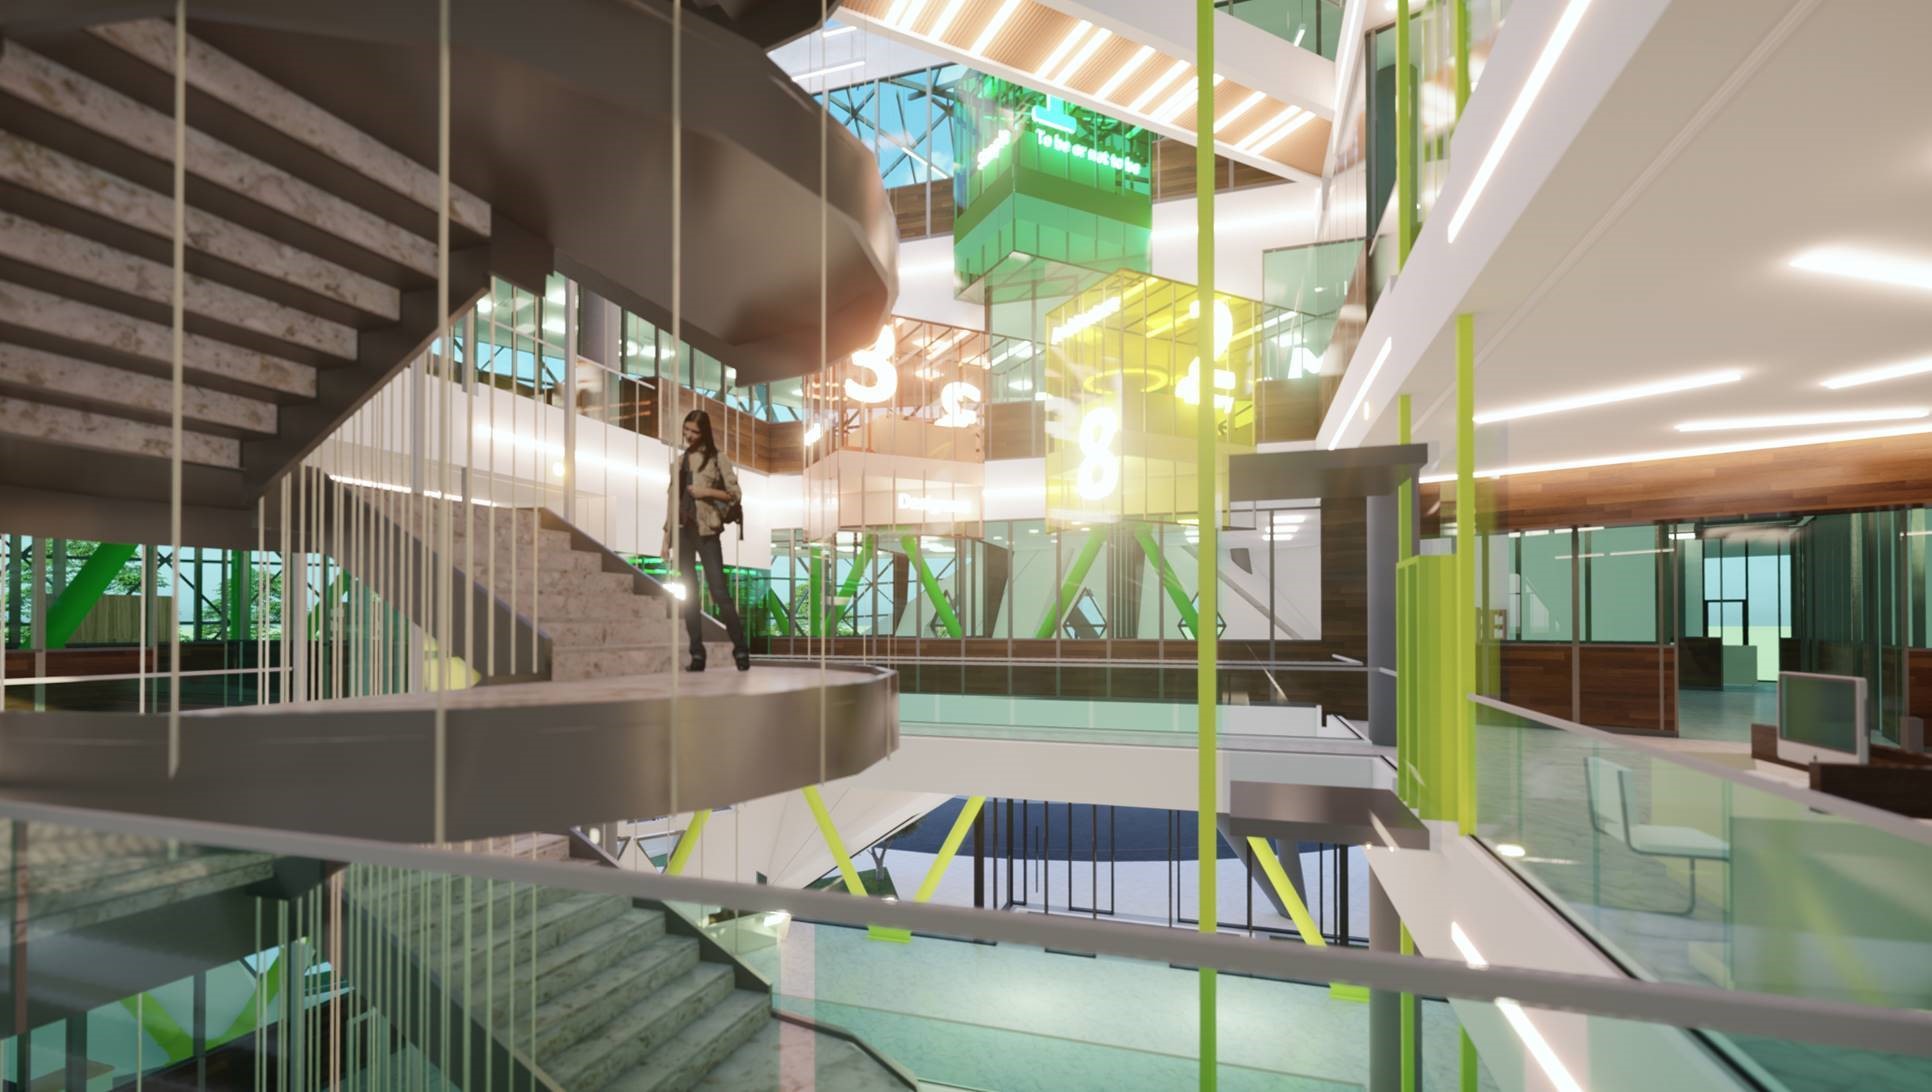 A design for the Faculty of Modern Sciences and Modern Media